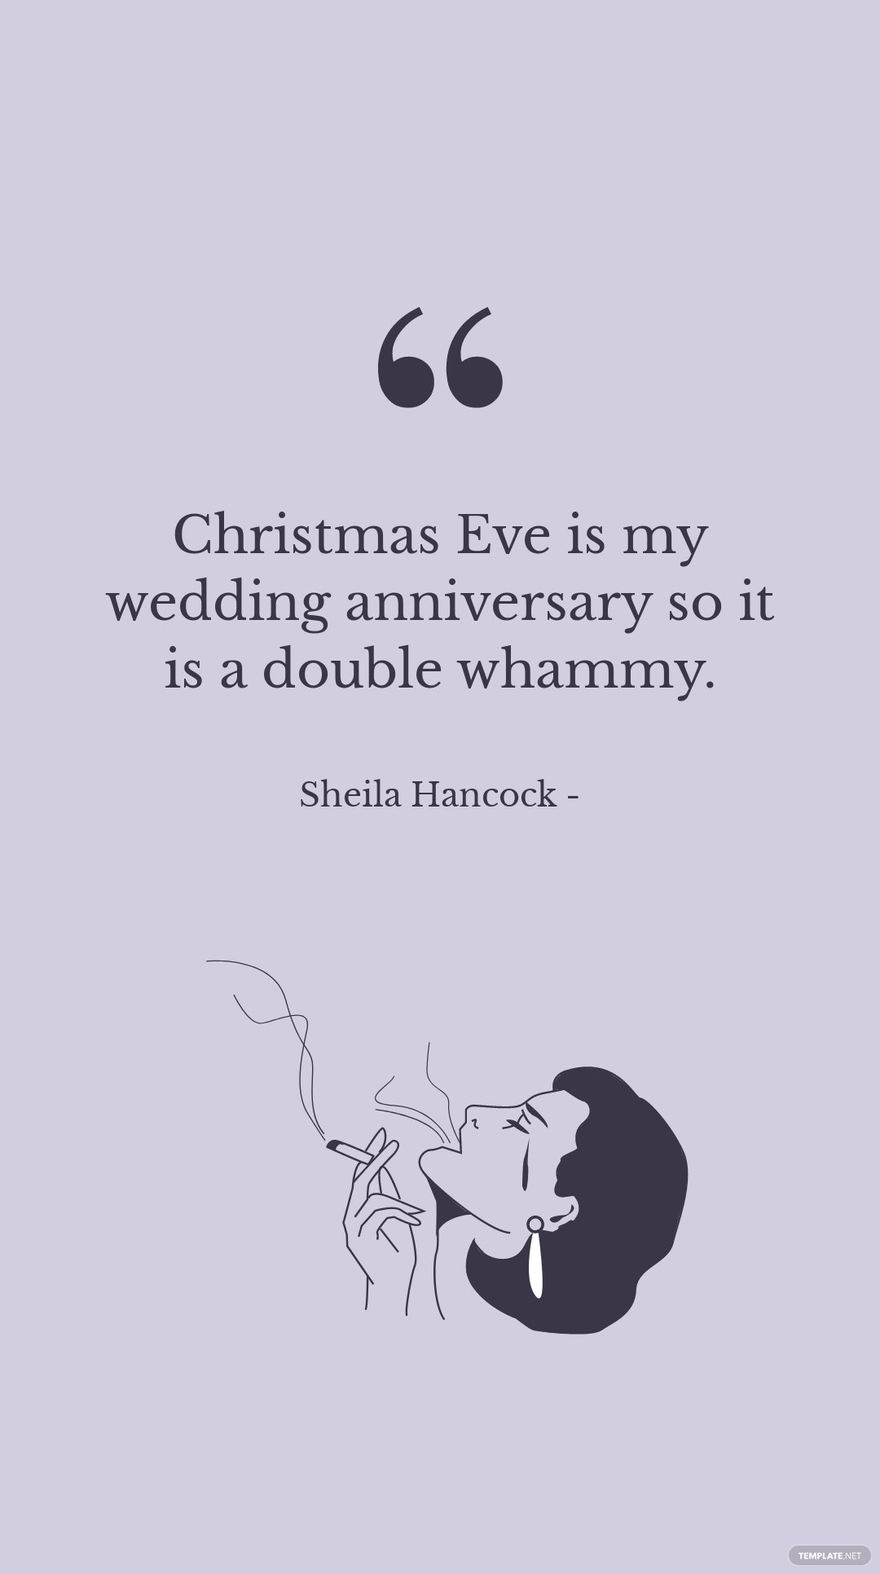 Sheila Hancock - Christmas Eve is my wedding anniversary so it is a double whammy. in JPG